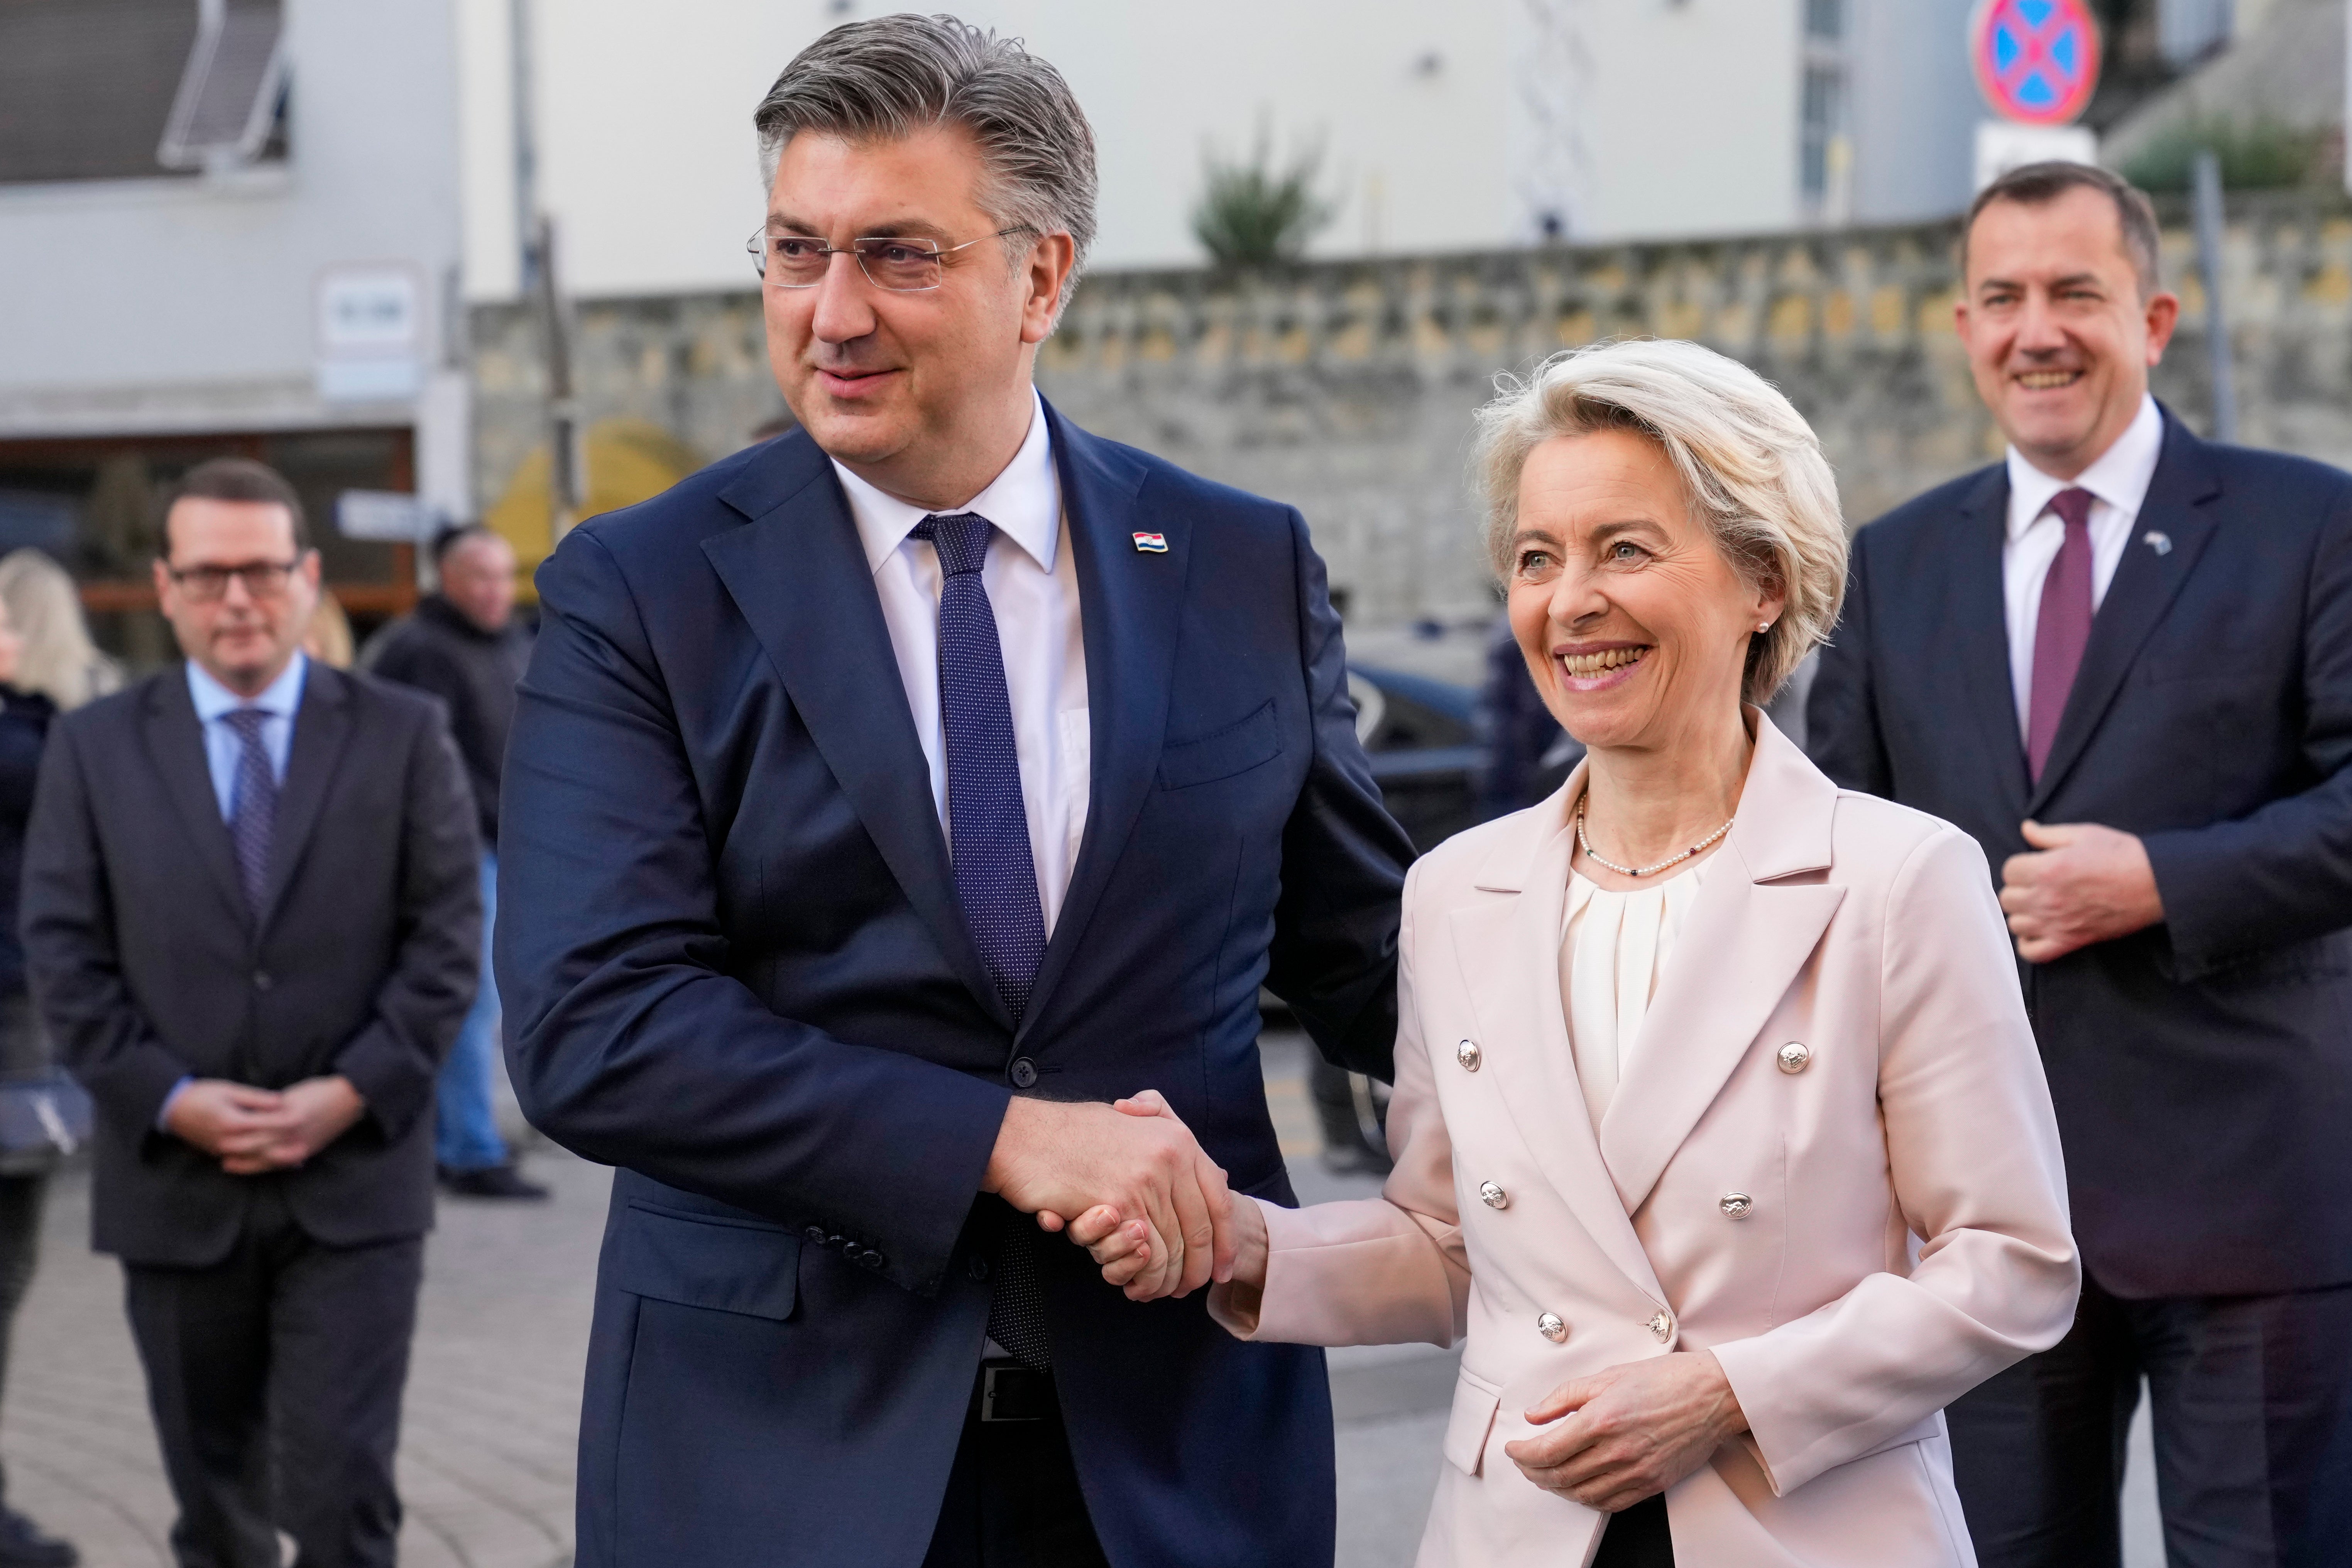 Croatia's Prim Minister Andrej Plenkovic shakes hands with Ursula von der Leyen, President of the European Commission, in Zagreb on January 1st